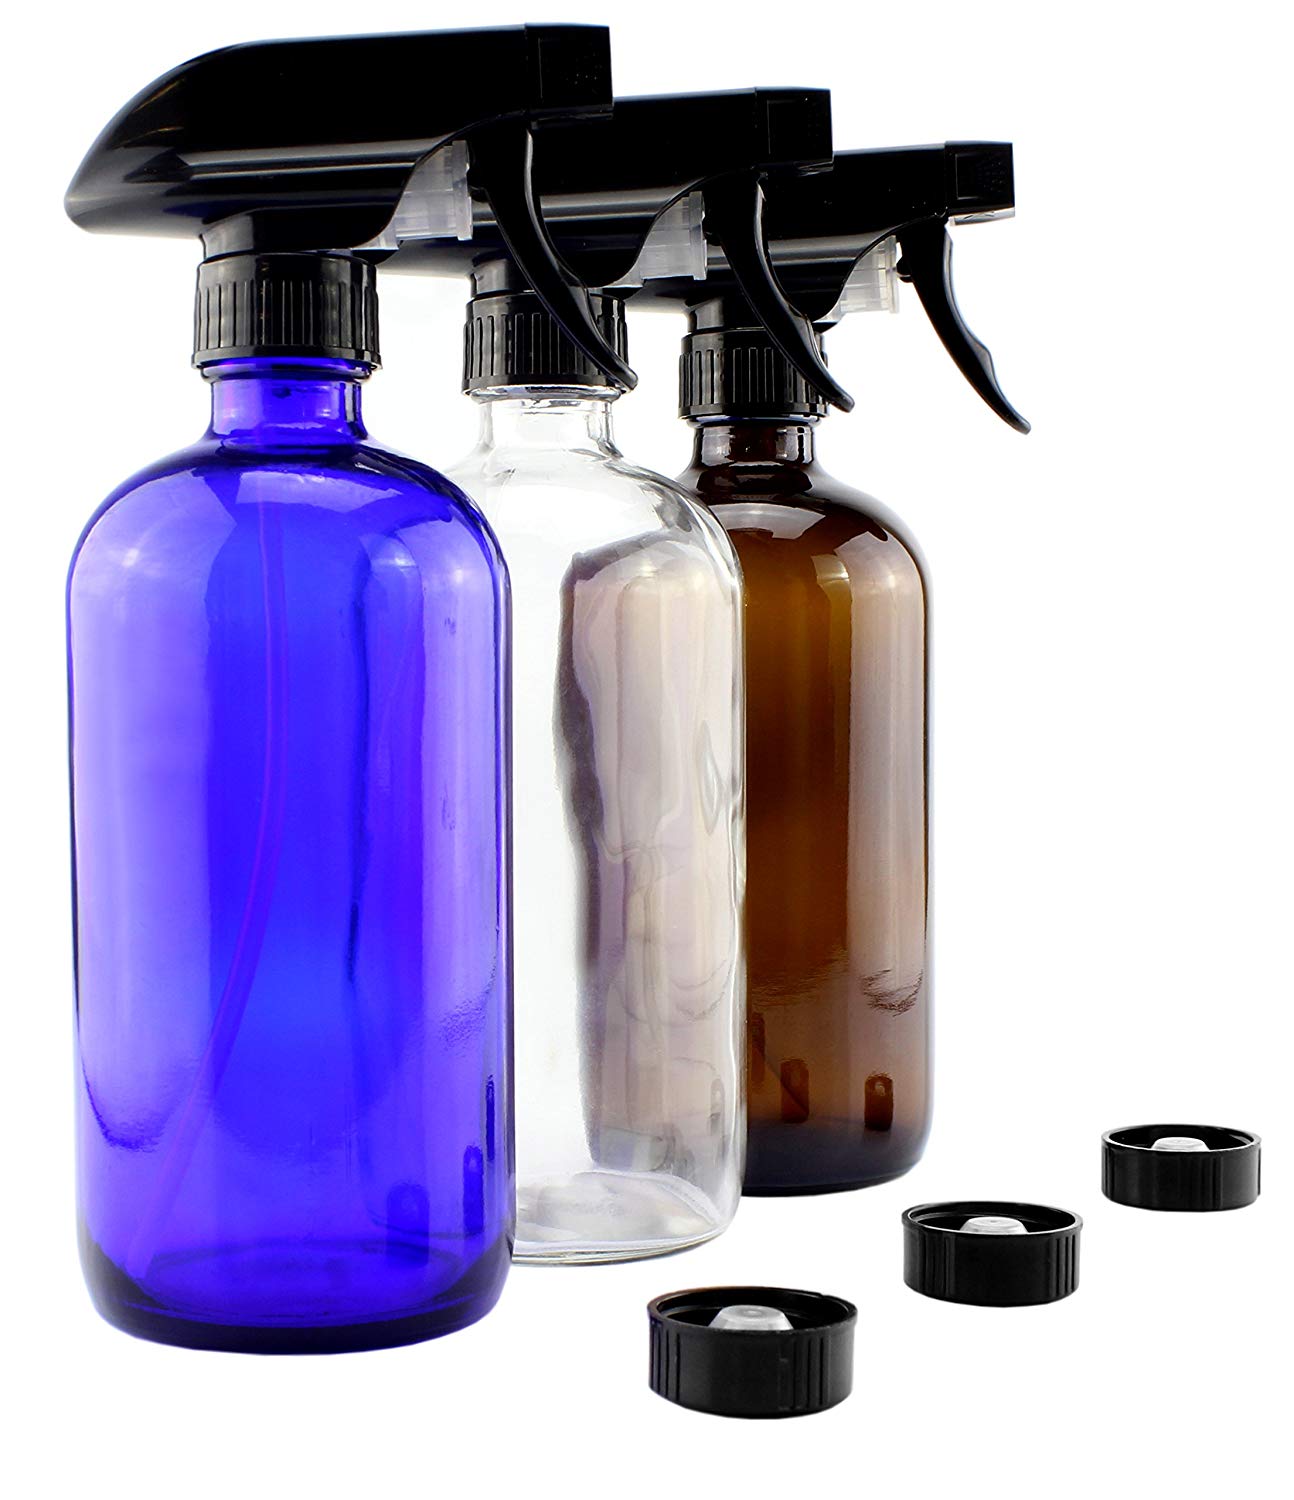 Tri-color glass spray bottles for all your home made cleaners! I like to keep one in each room (bath, kitchen, dining/living) to quick touch ups between cleanings. 